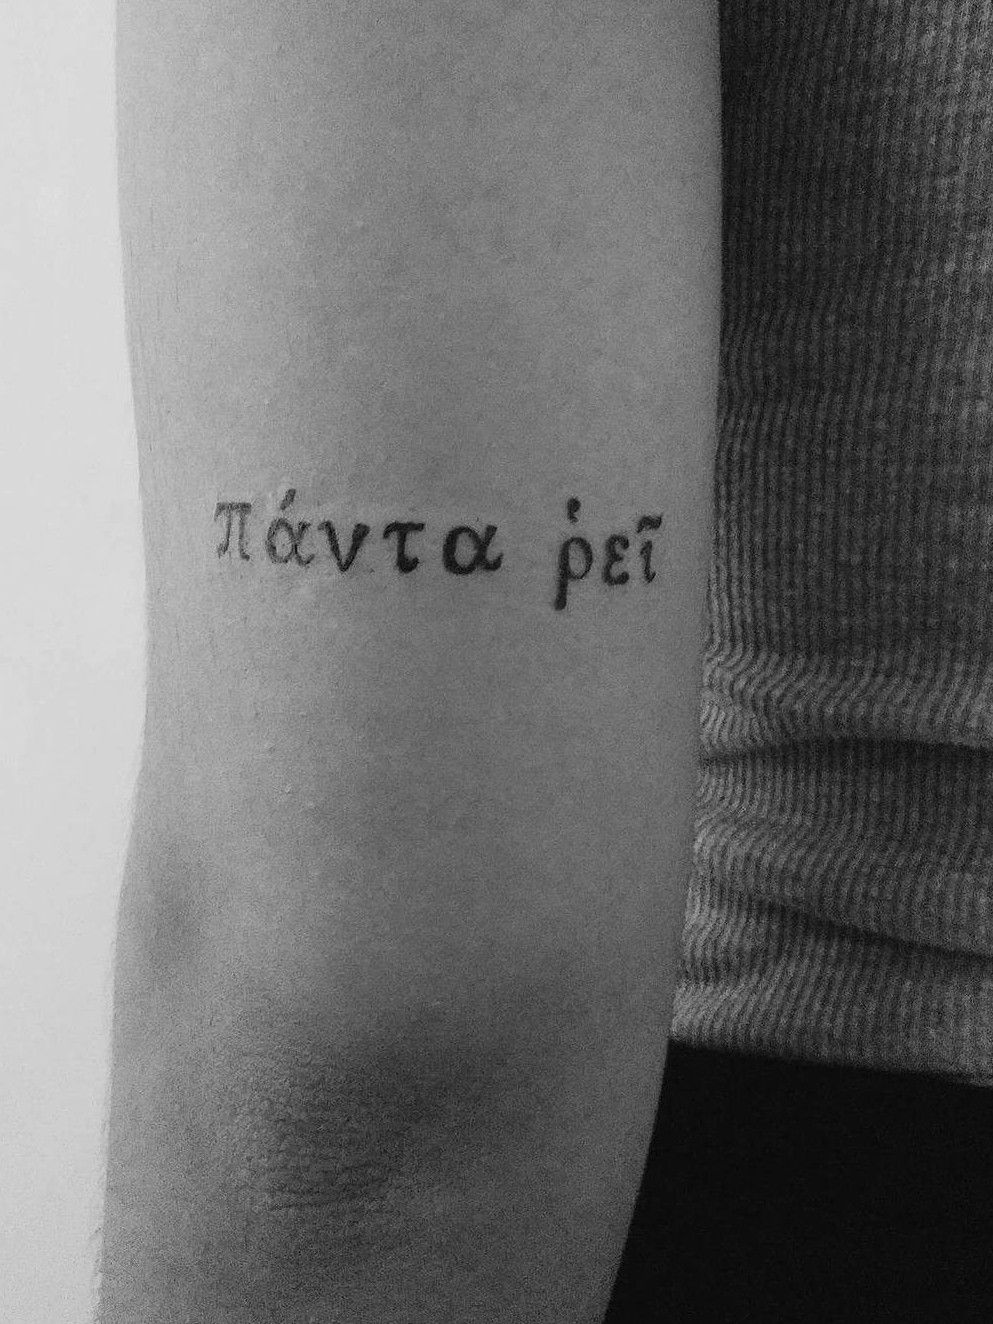 Tattoo Ideas Greek Words and Phrases  Greek quotes Tattoo quotes  Alexander the great quotes